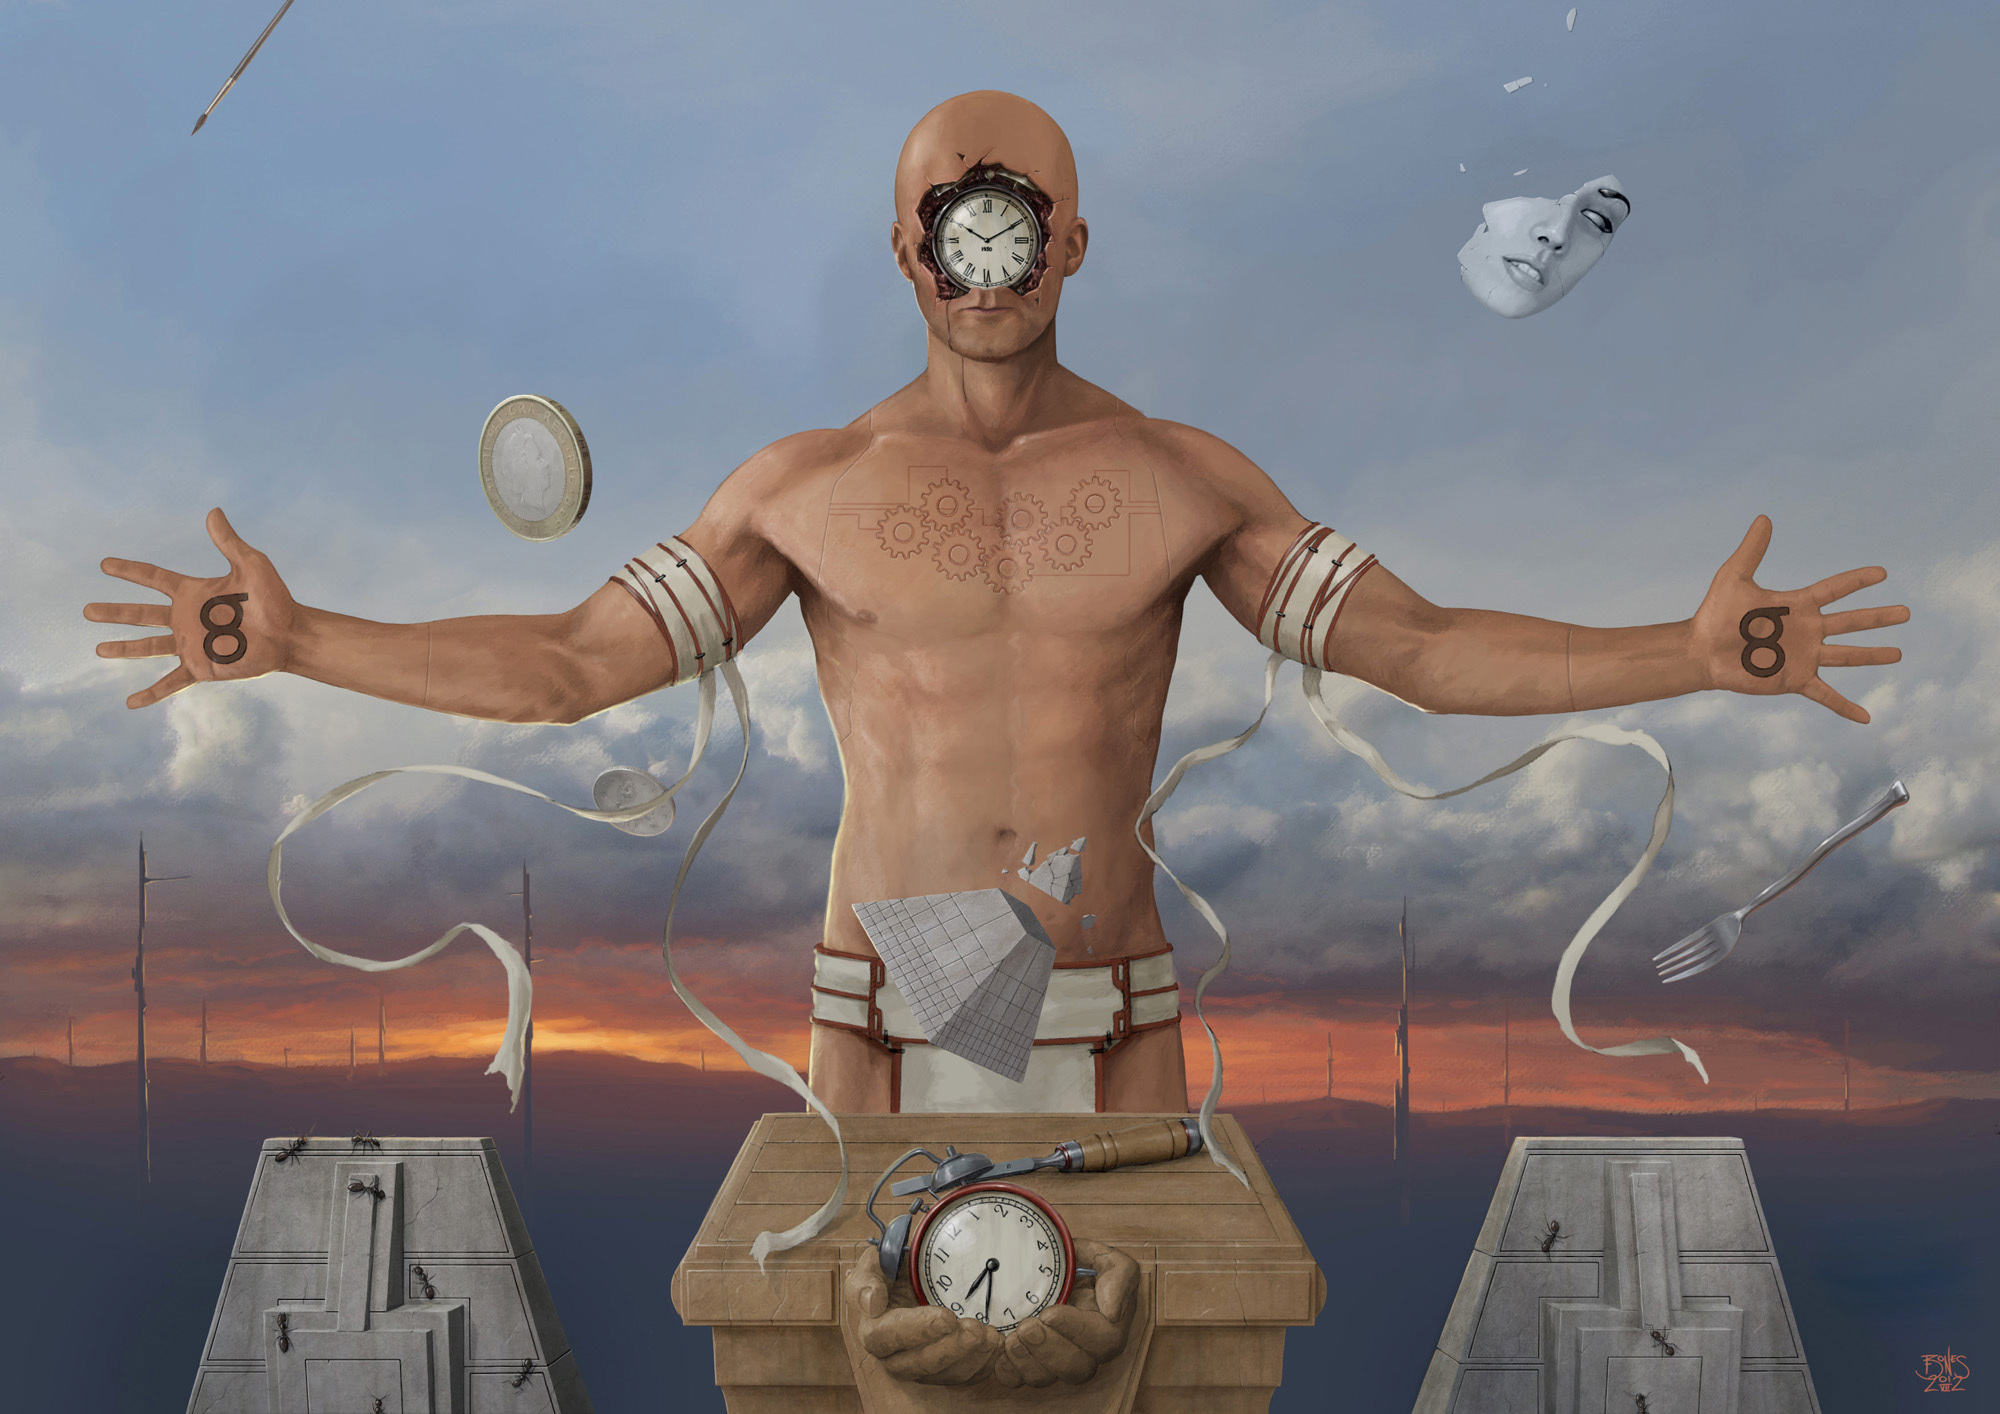 art, Clock, People, Surrealism, Bandages, Money, Coins, Ants, Pyramid, Face Wallpaper